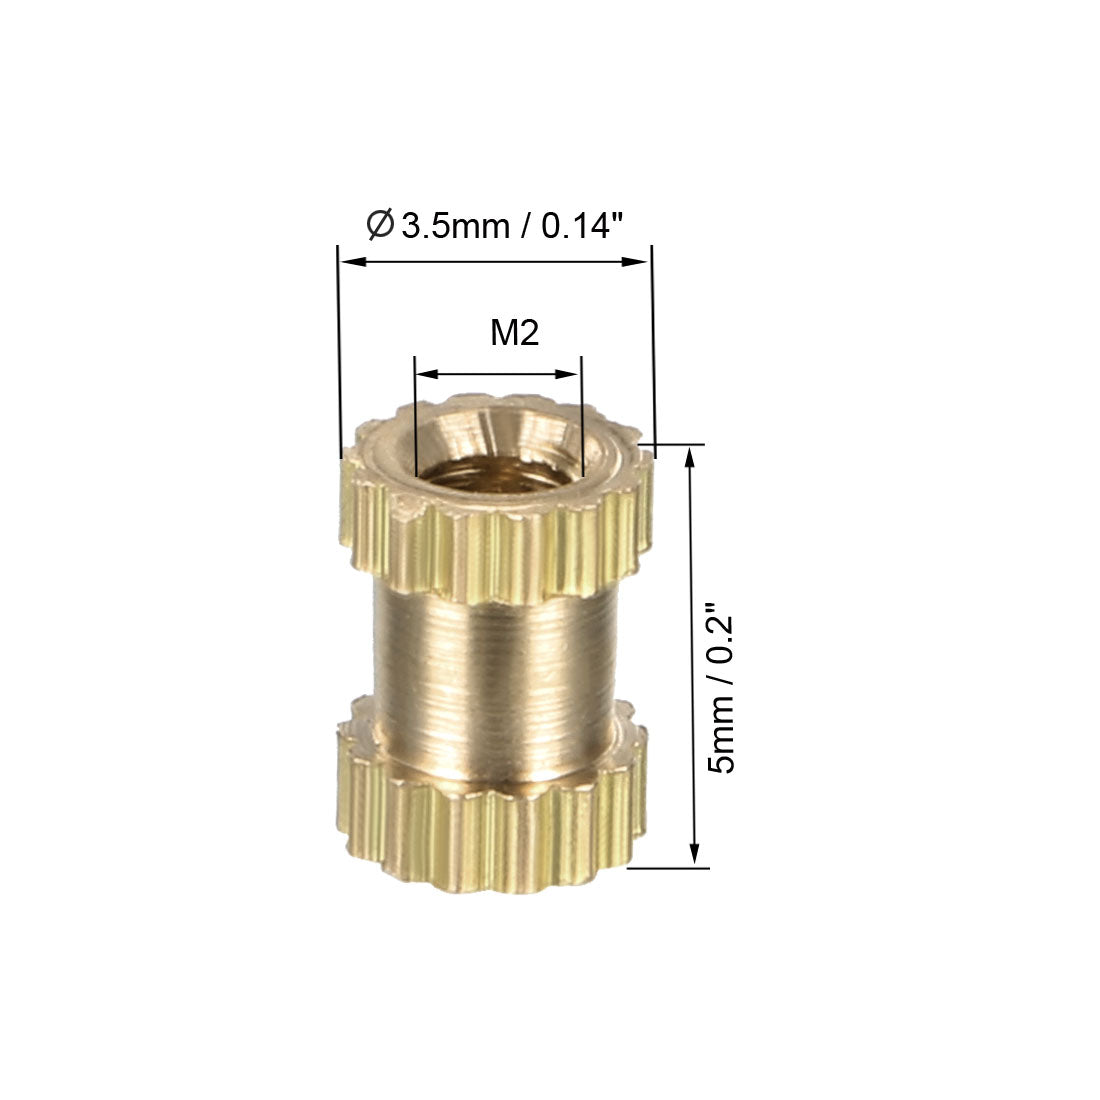 uxcell Uxcell Knurled Insert Nuts - Female Thread Threaded Insert Embedment Nut